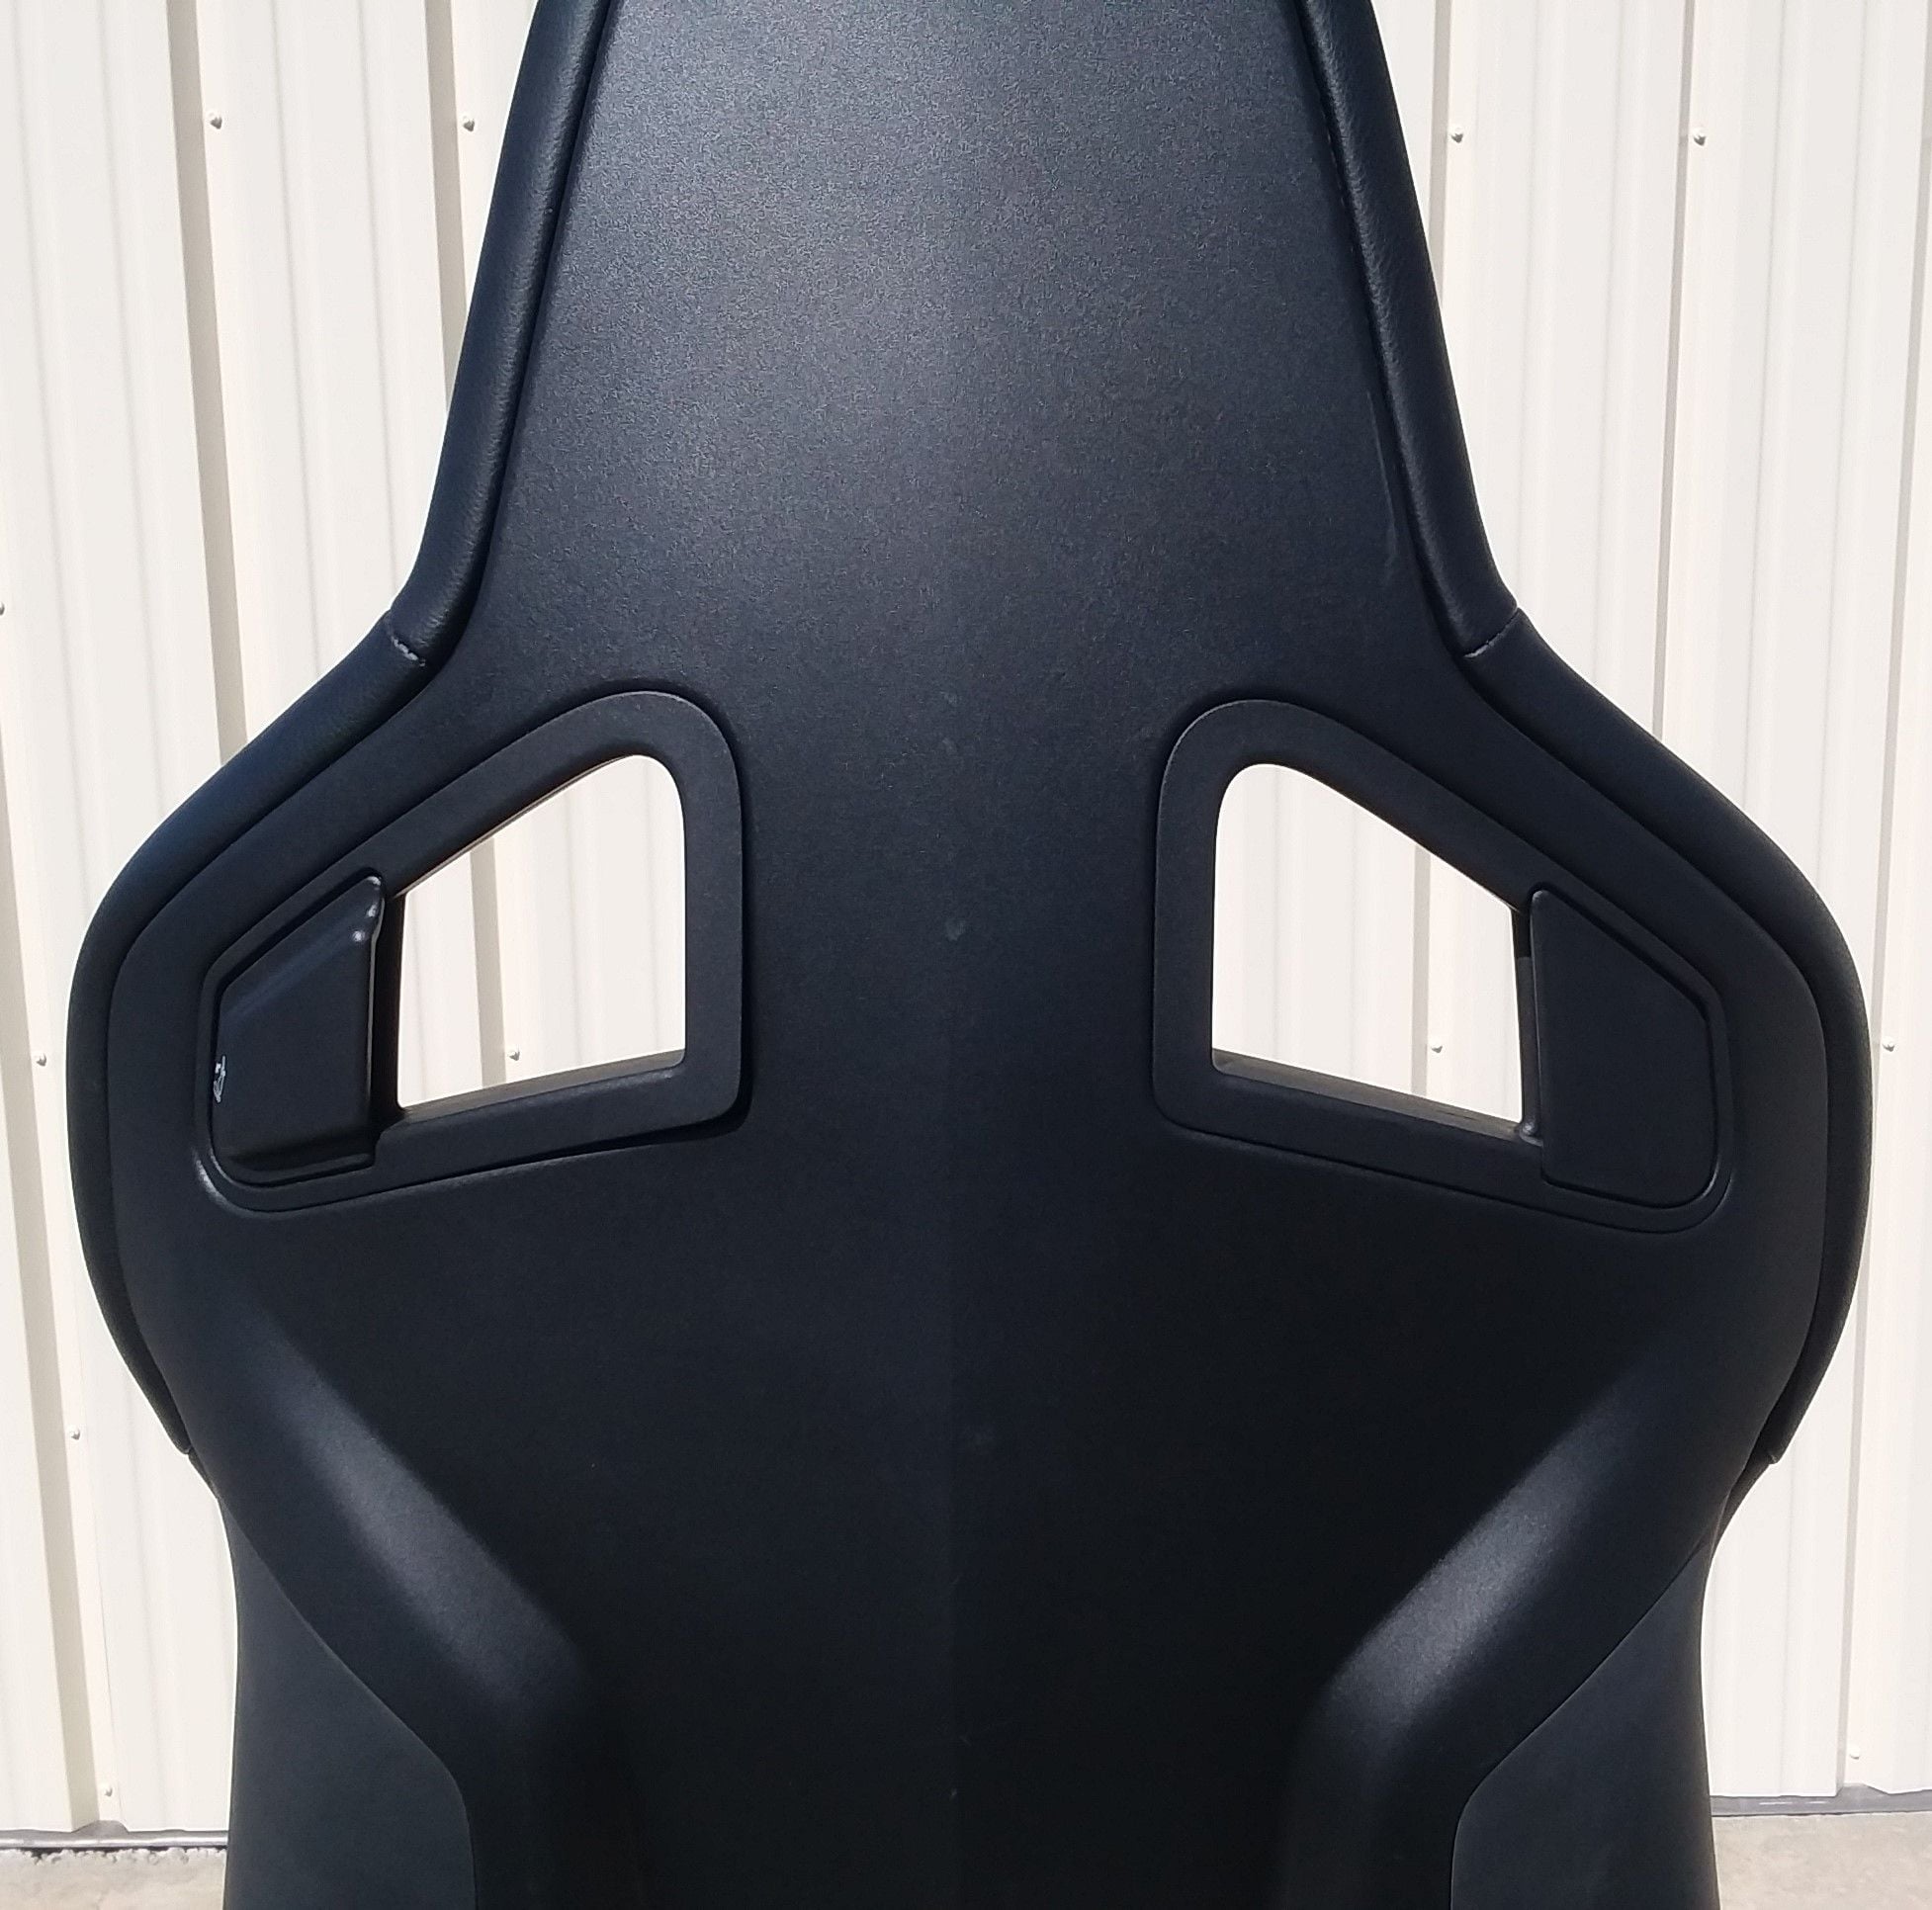 Interior/Upholstery - Recaro Sportster CS Seats - Used - All Years  All Models - Colorado Springs, CO 80906, United States